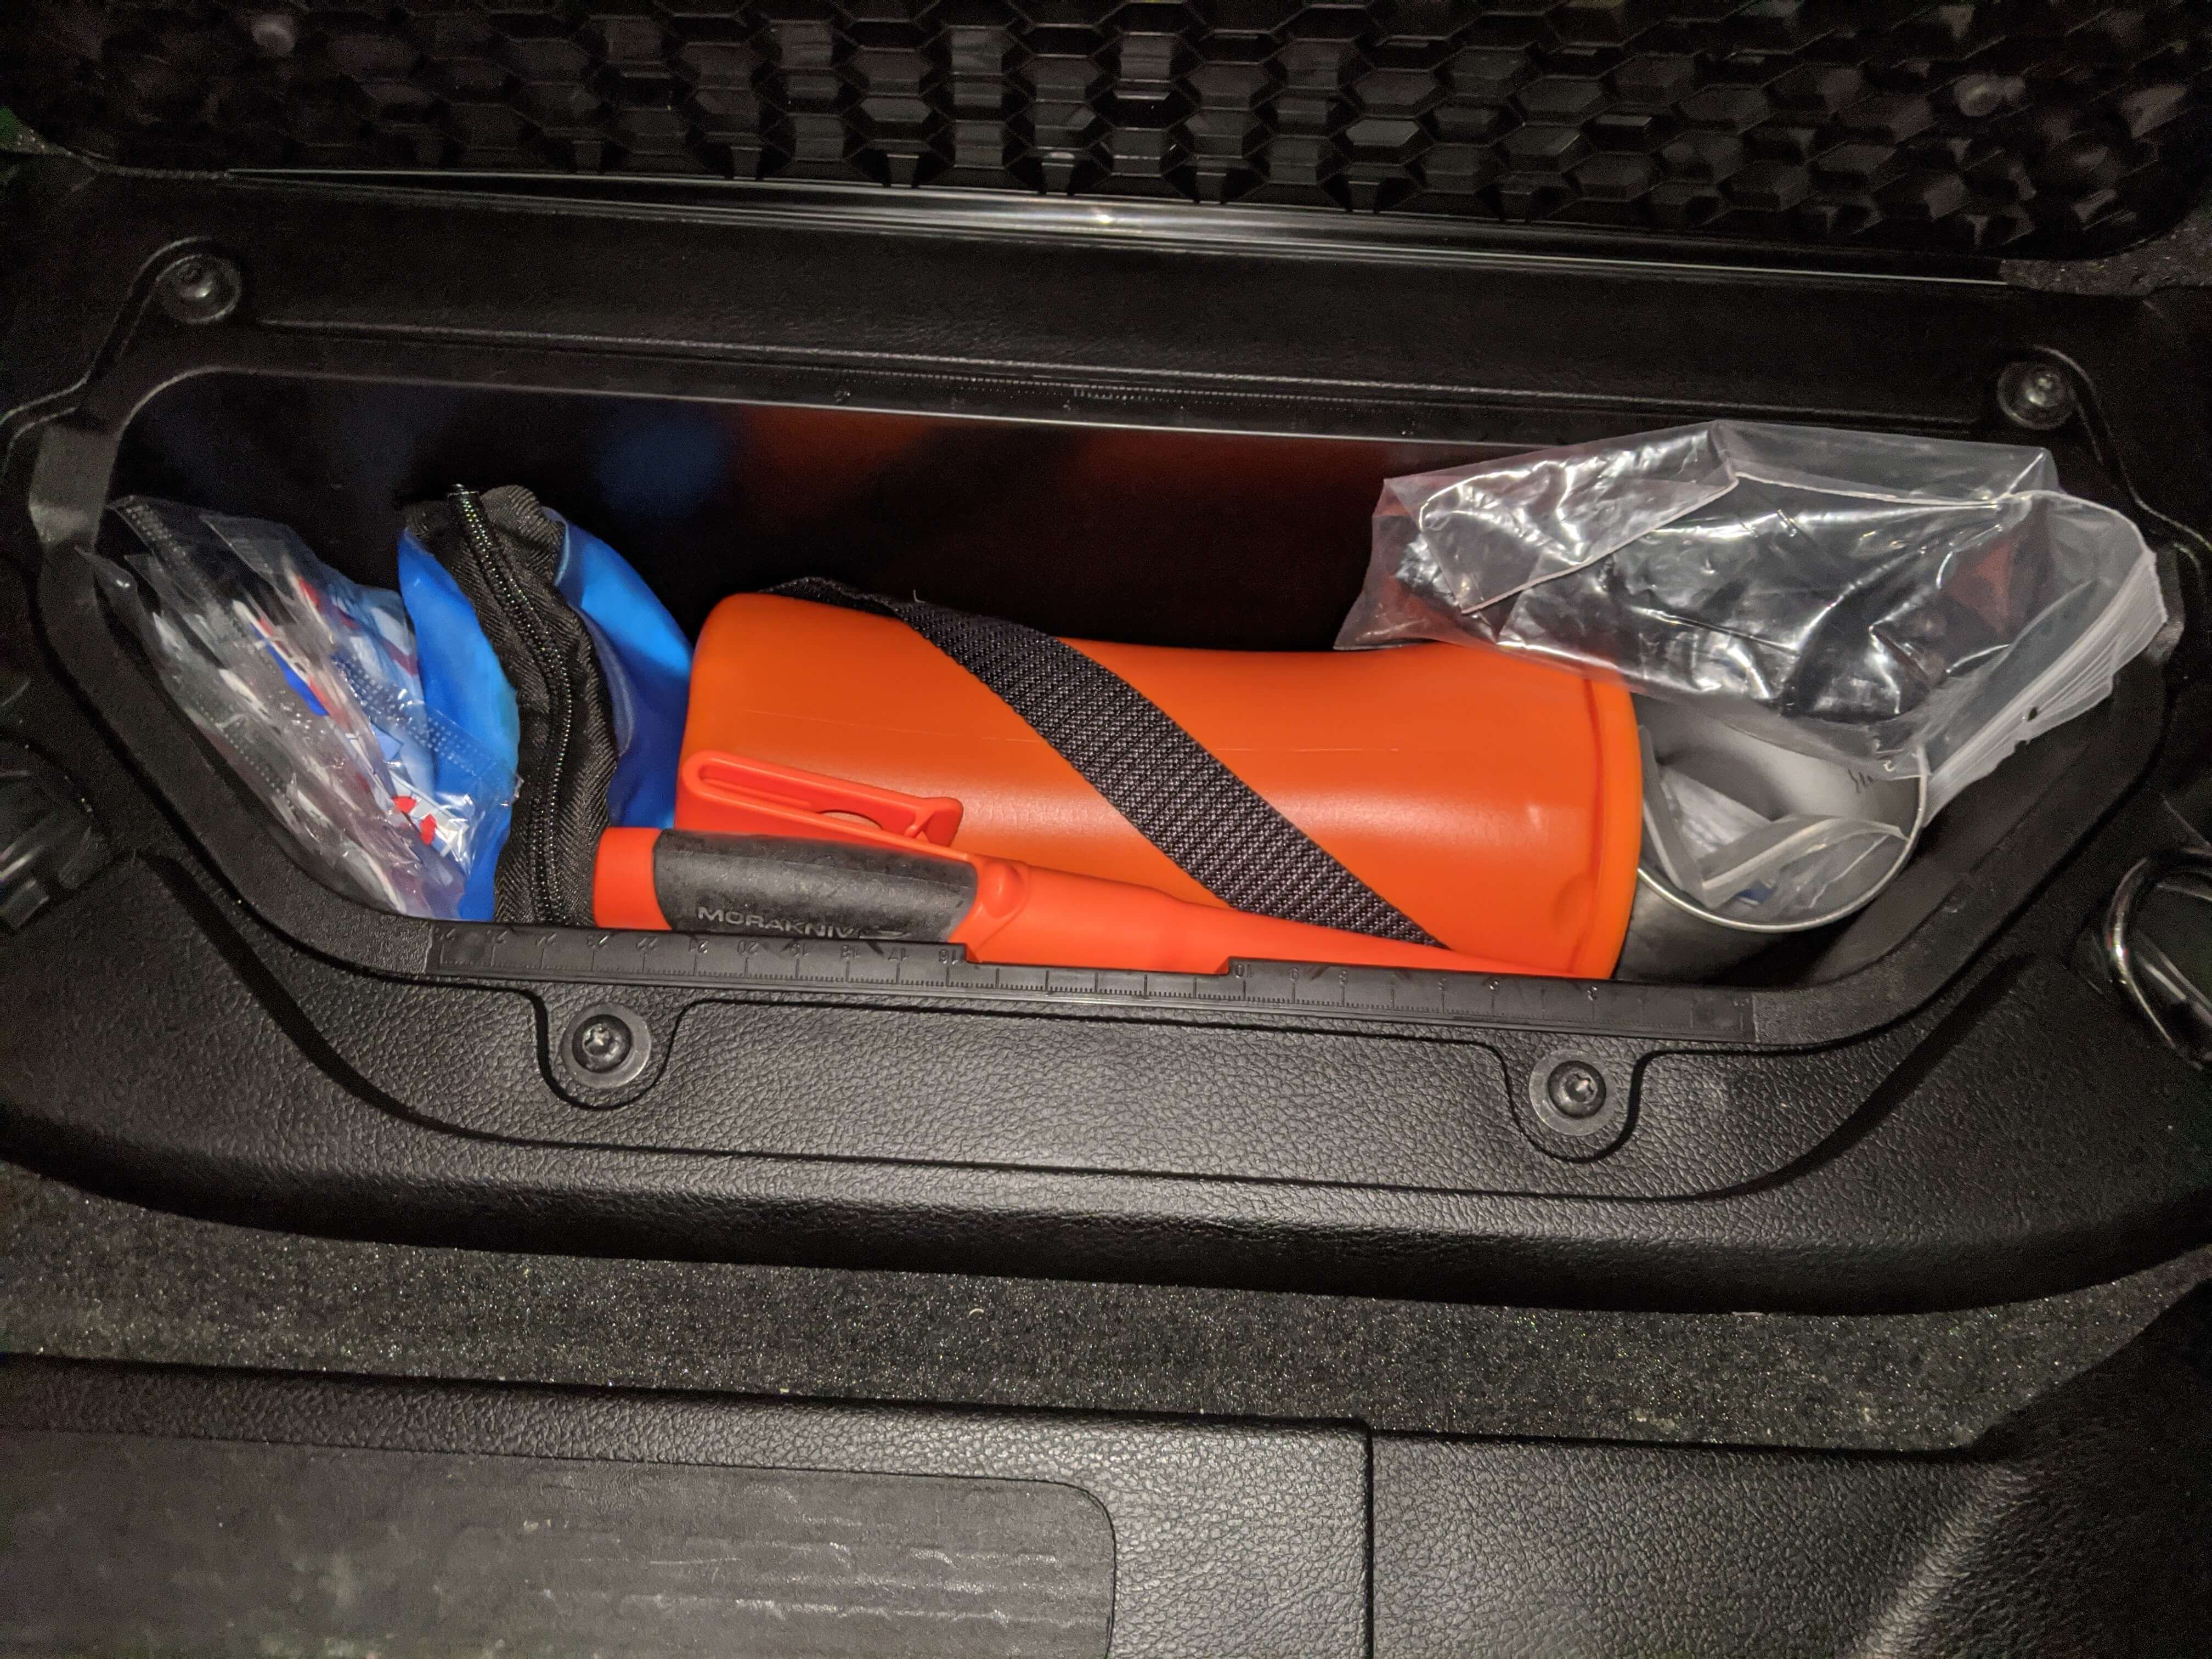 survival kit stored in compartment